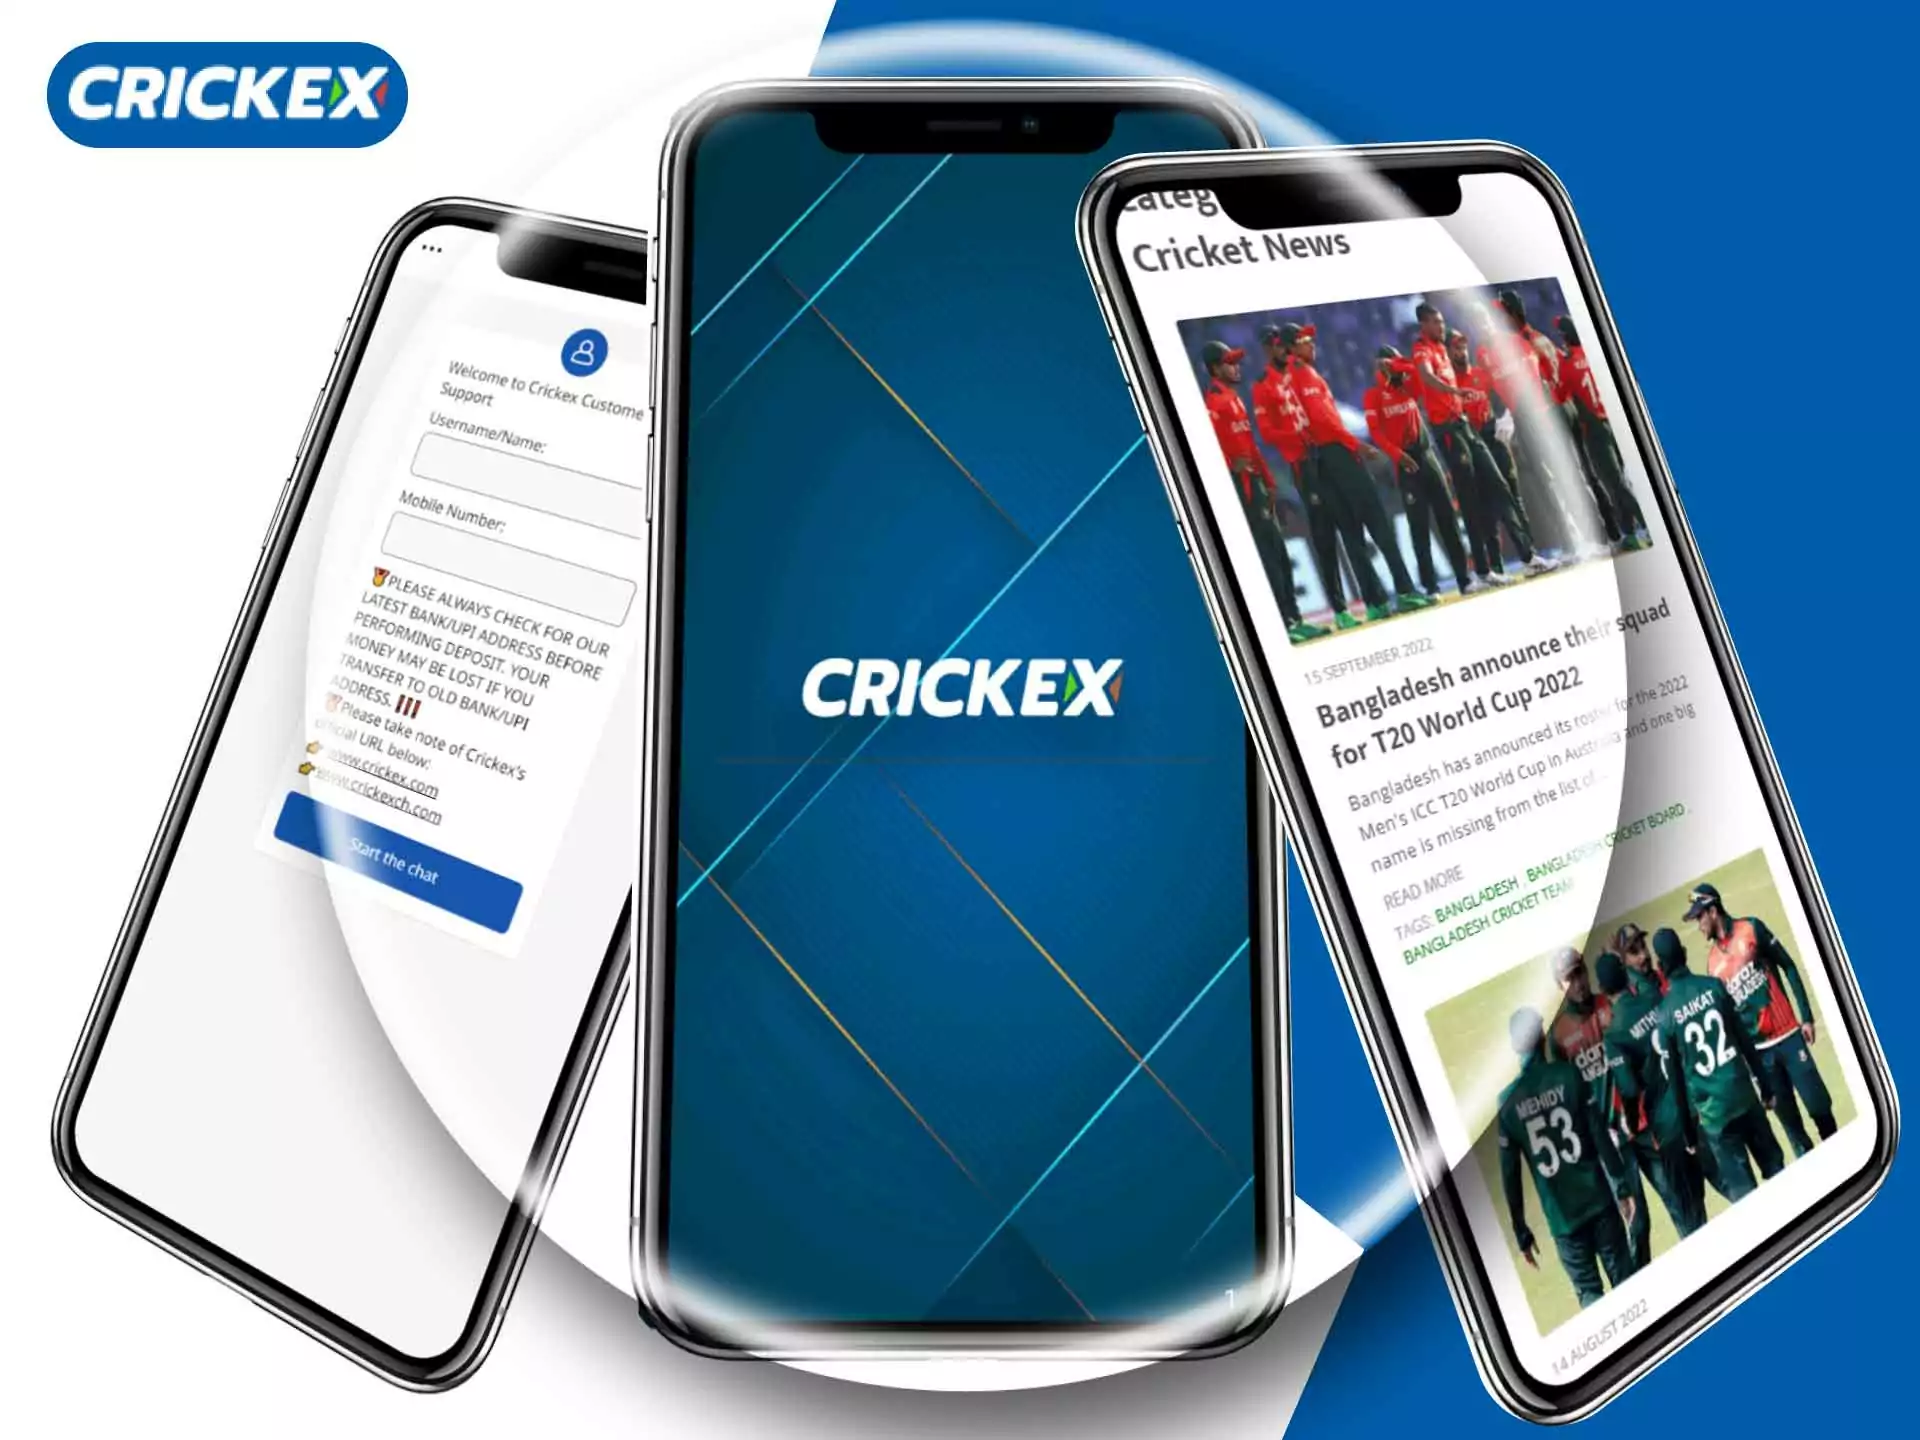 There re many convenient features in the Crickex app.